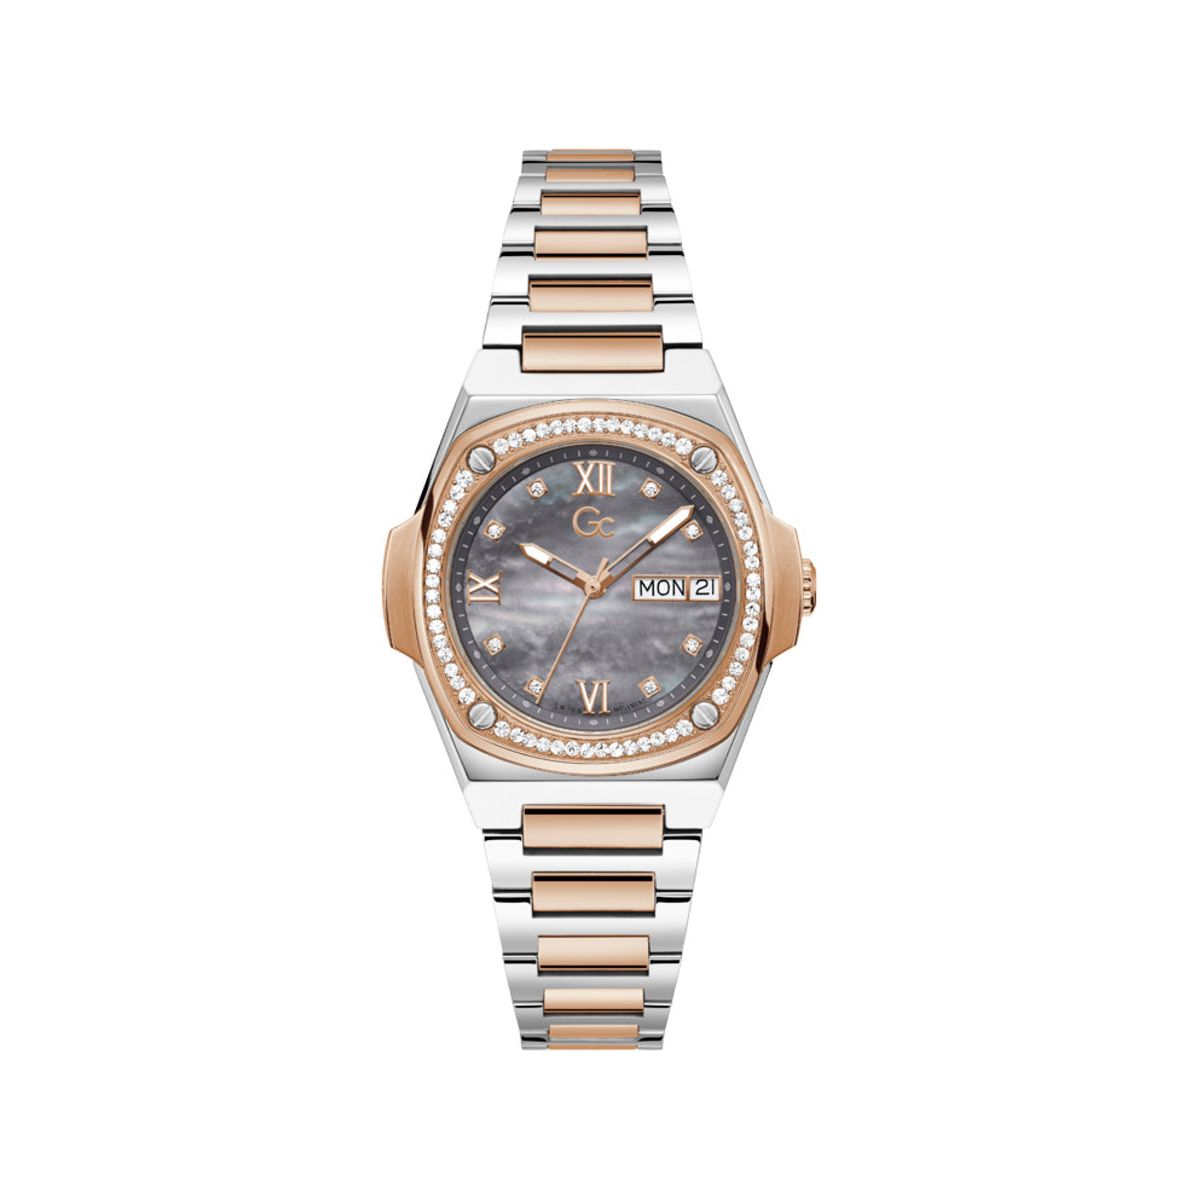 GUESS COLLECTION GUESS COLLECTION WATCHES Mod. Y98001L5MF WATCHES guess-collection-watches-mod-y98001l5mf